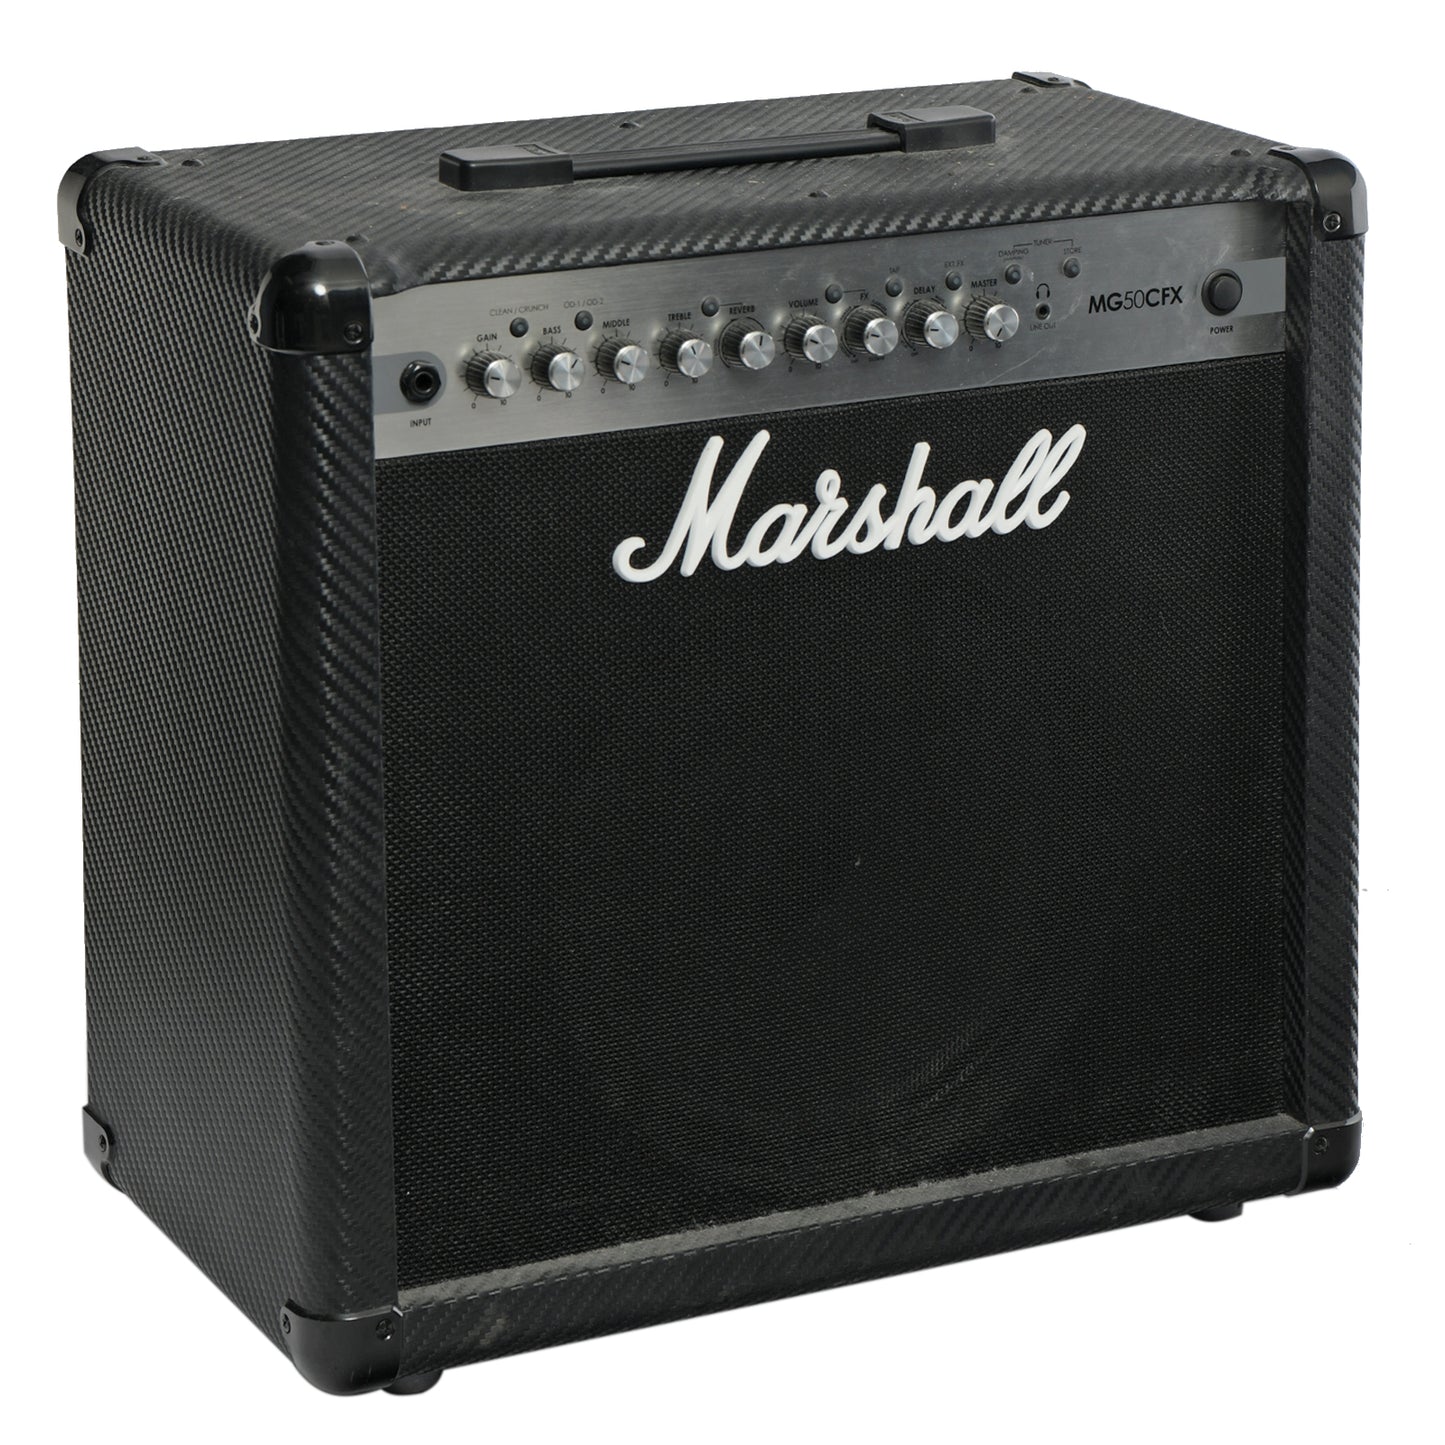 Front and side of Marshall MG50CFX